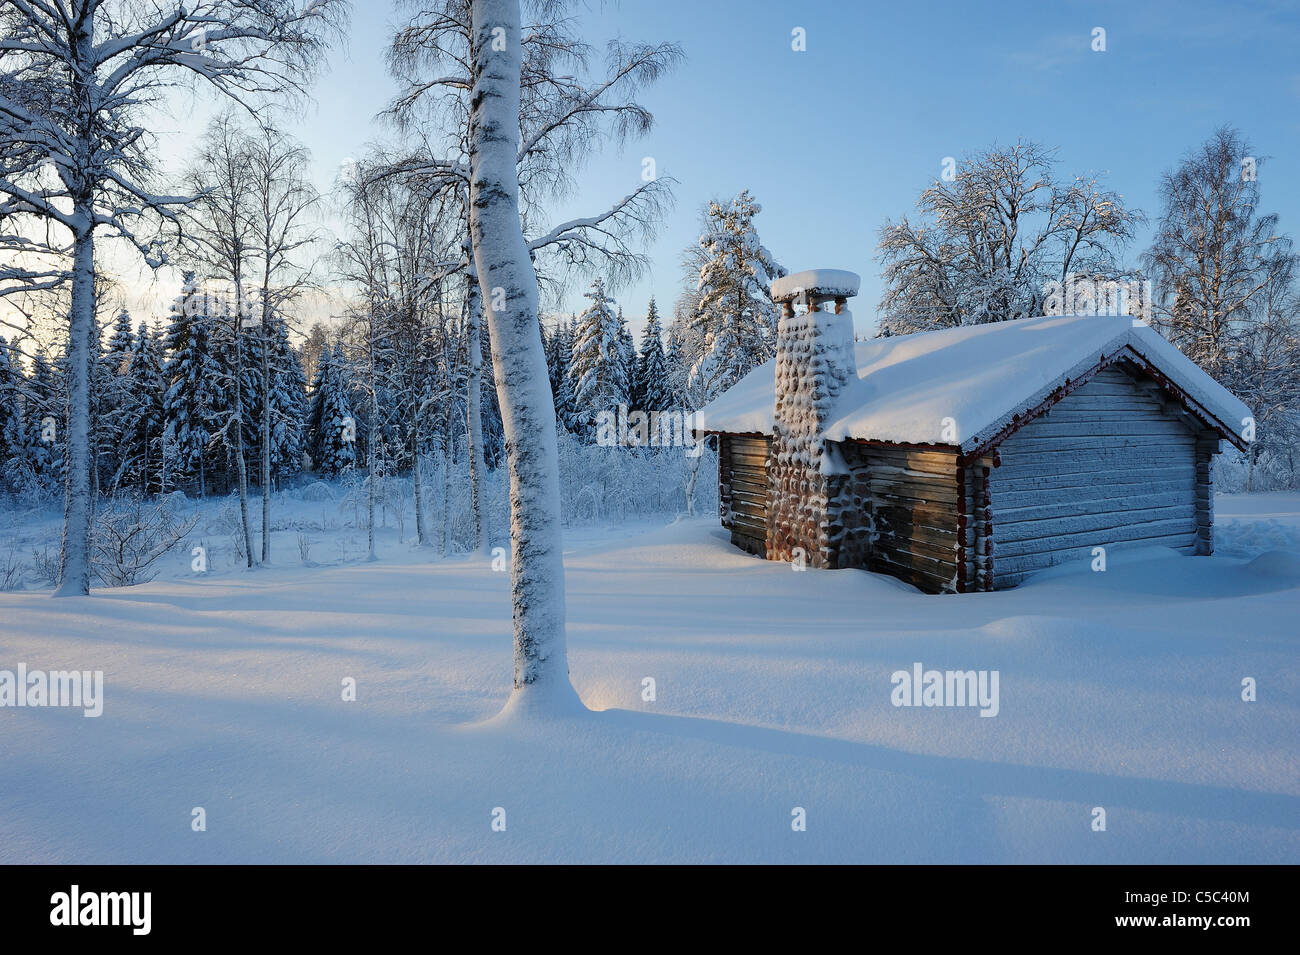 Log cabin and hoarfrost trees in winter landscape Stock Photo